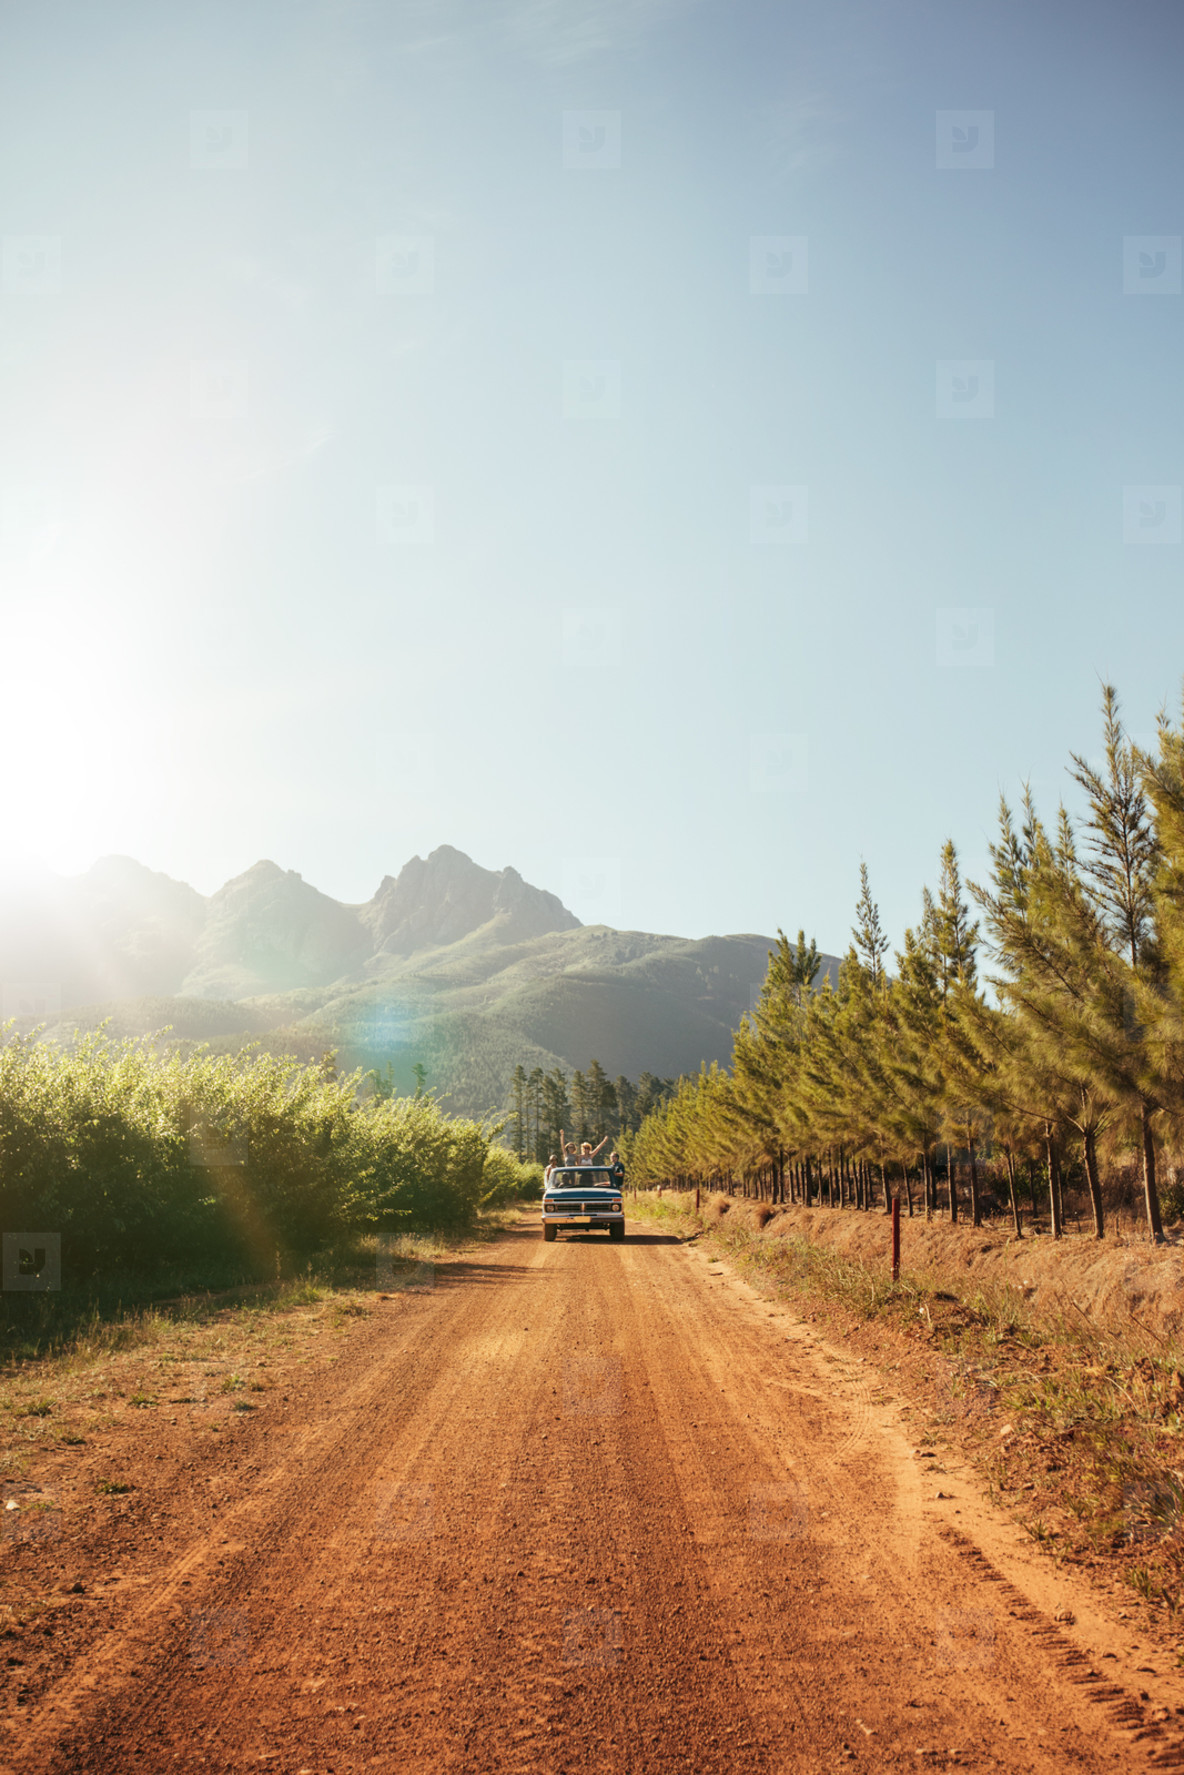 Distant car approaching on a rural dirt road on a sunny day